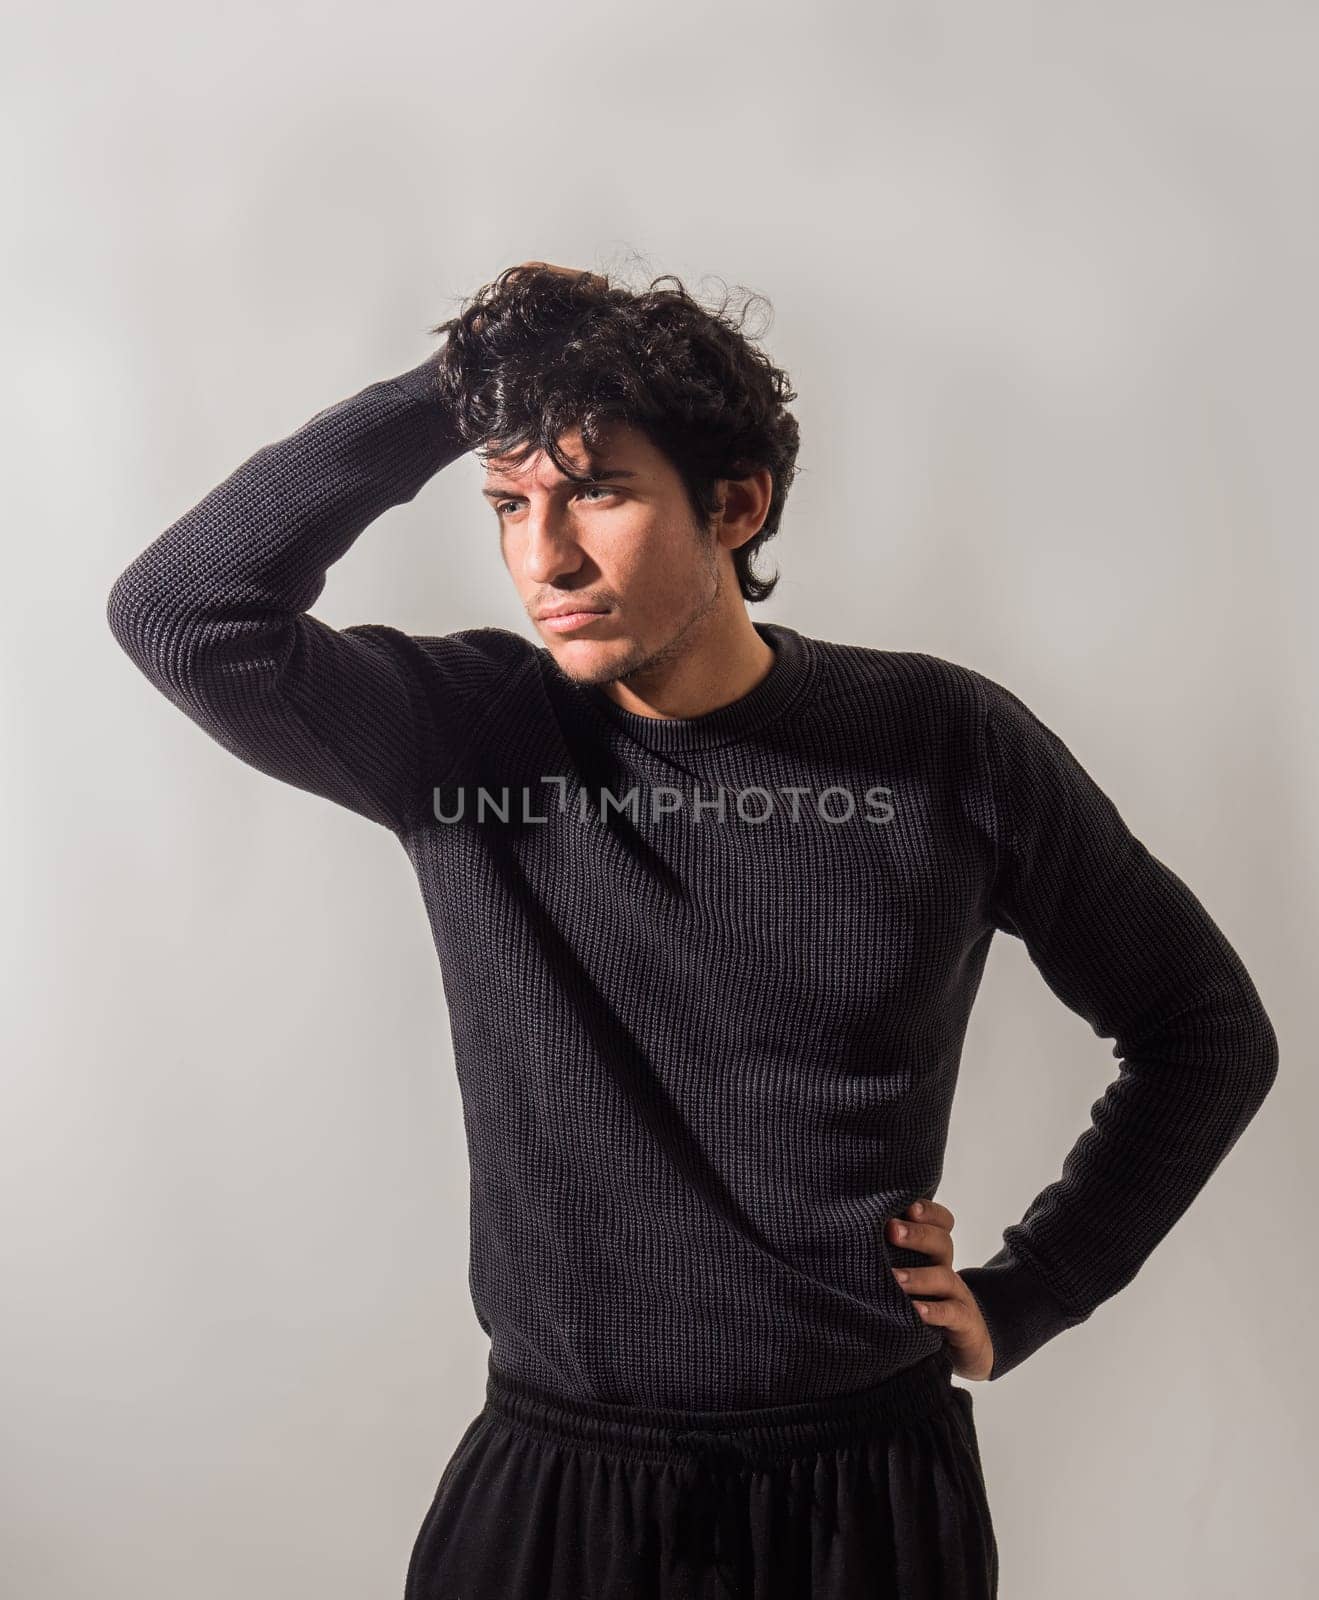 A Stylish Man Striking a Pose with His Hands on His Head by artofphoto